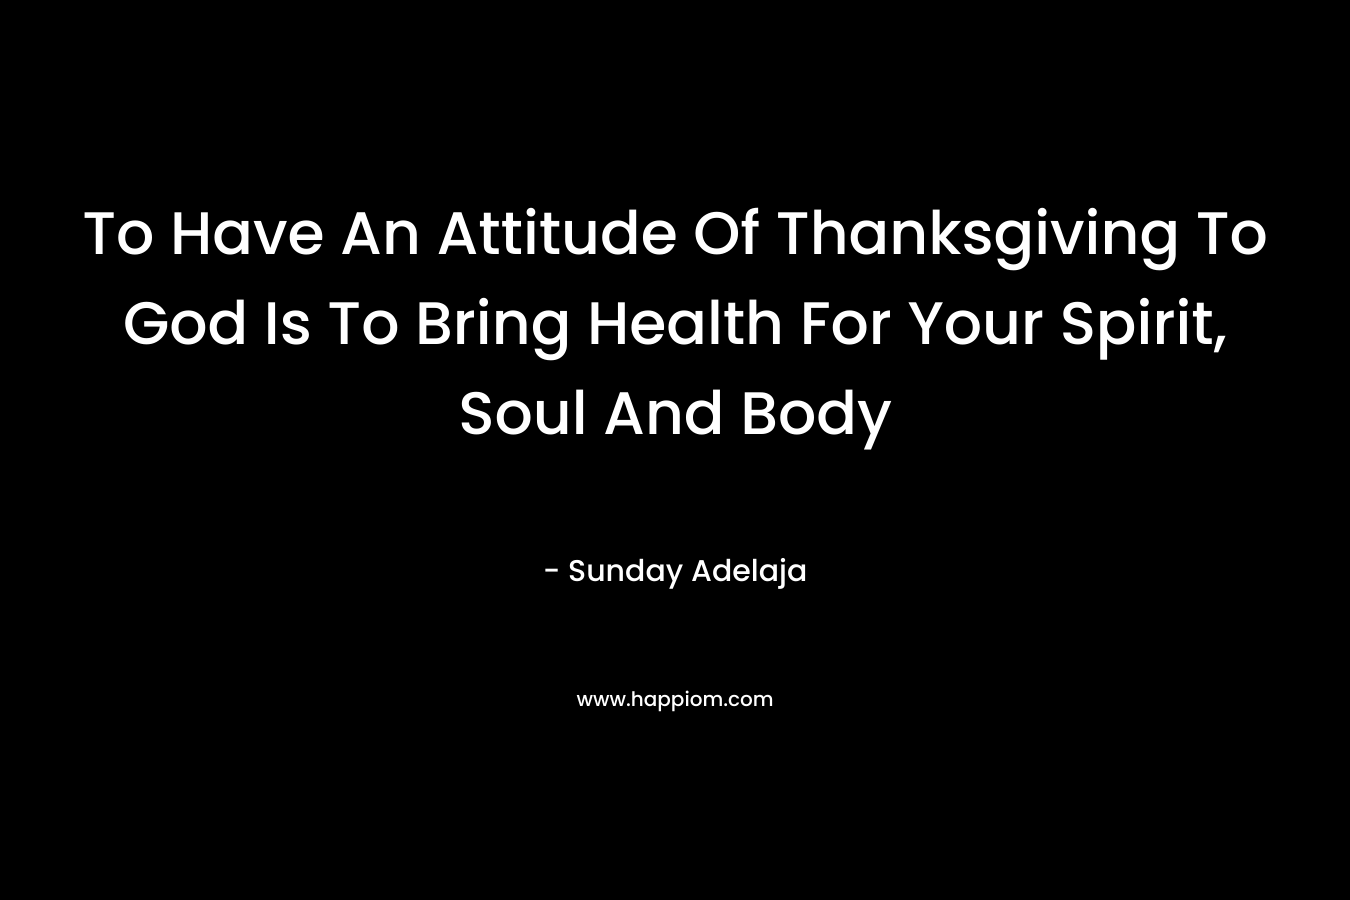 To Have An Attitude Of Thanksgiving To God Is To Bring Health For Your Spirit, Soul And Body